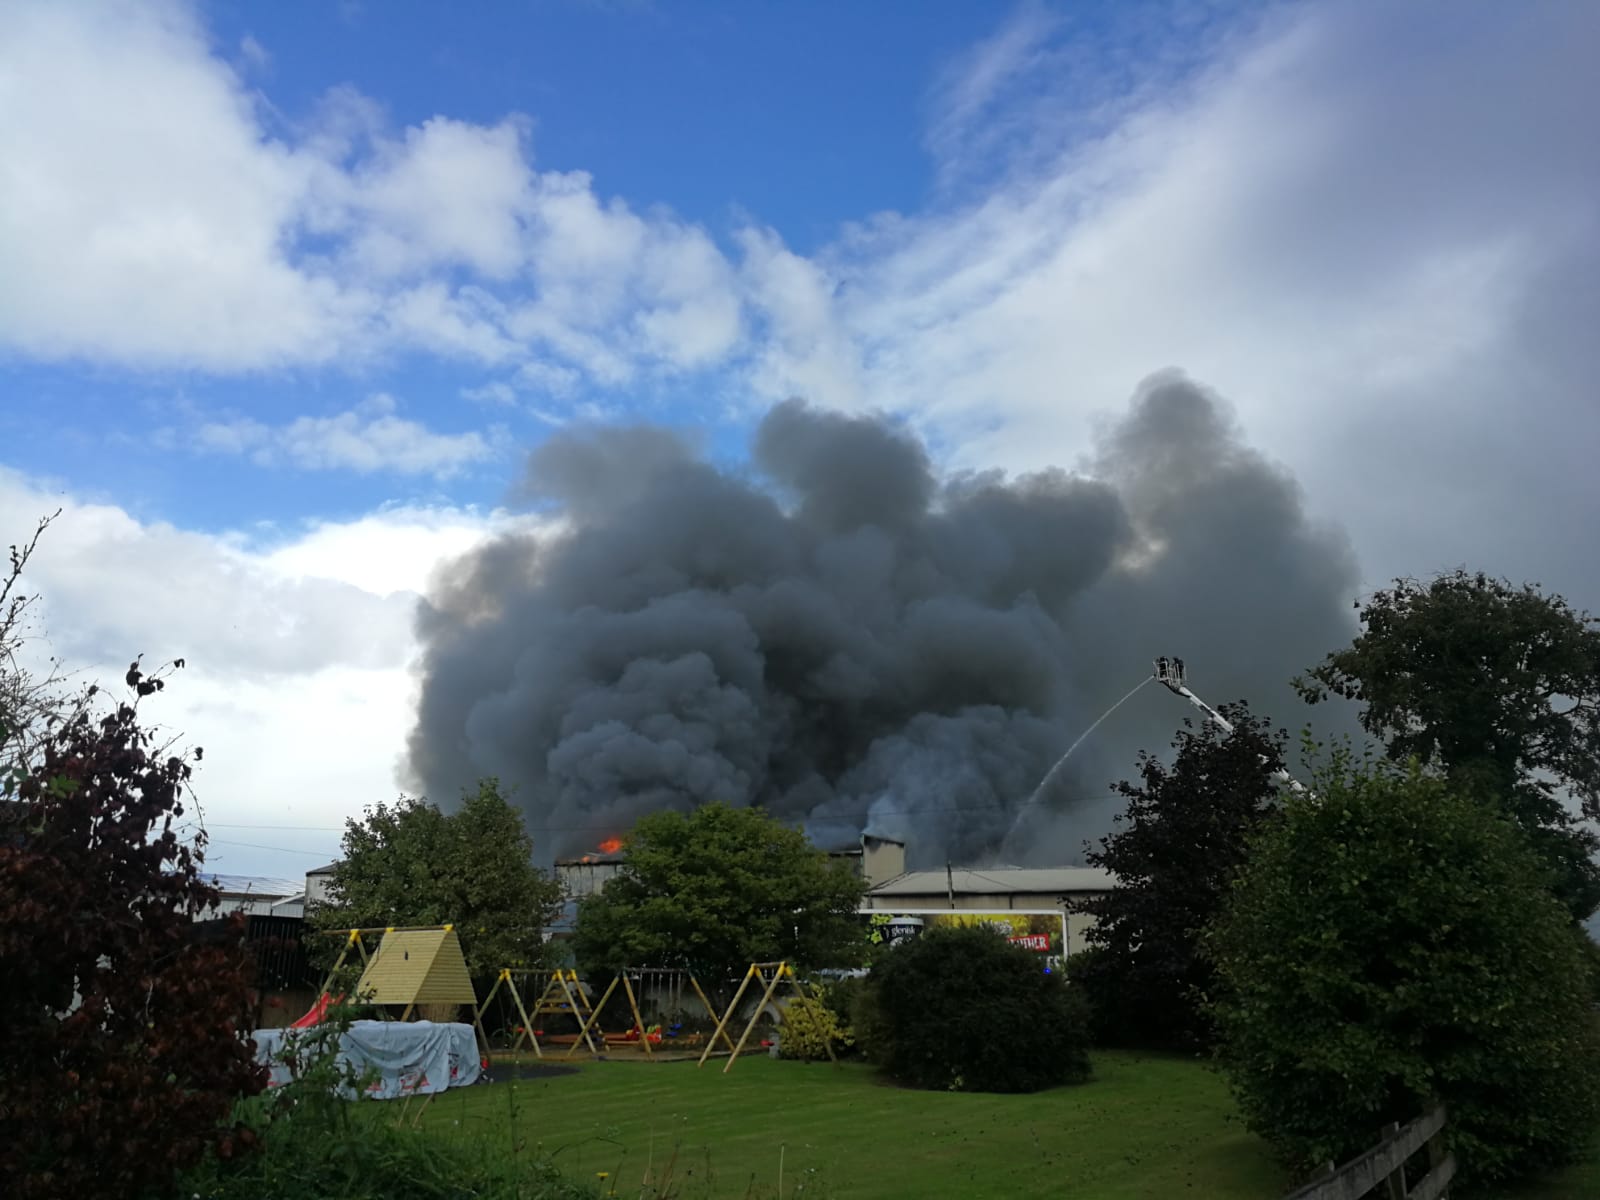 A serious fire at the Glenisk plant in County Offaly. Image: Midlands103.